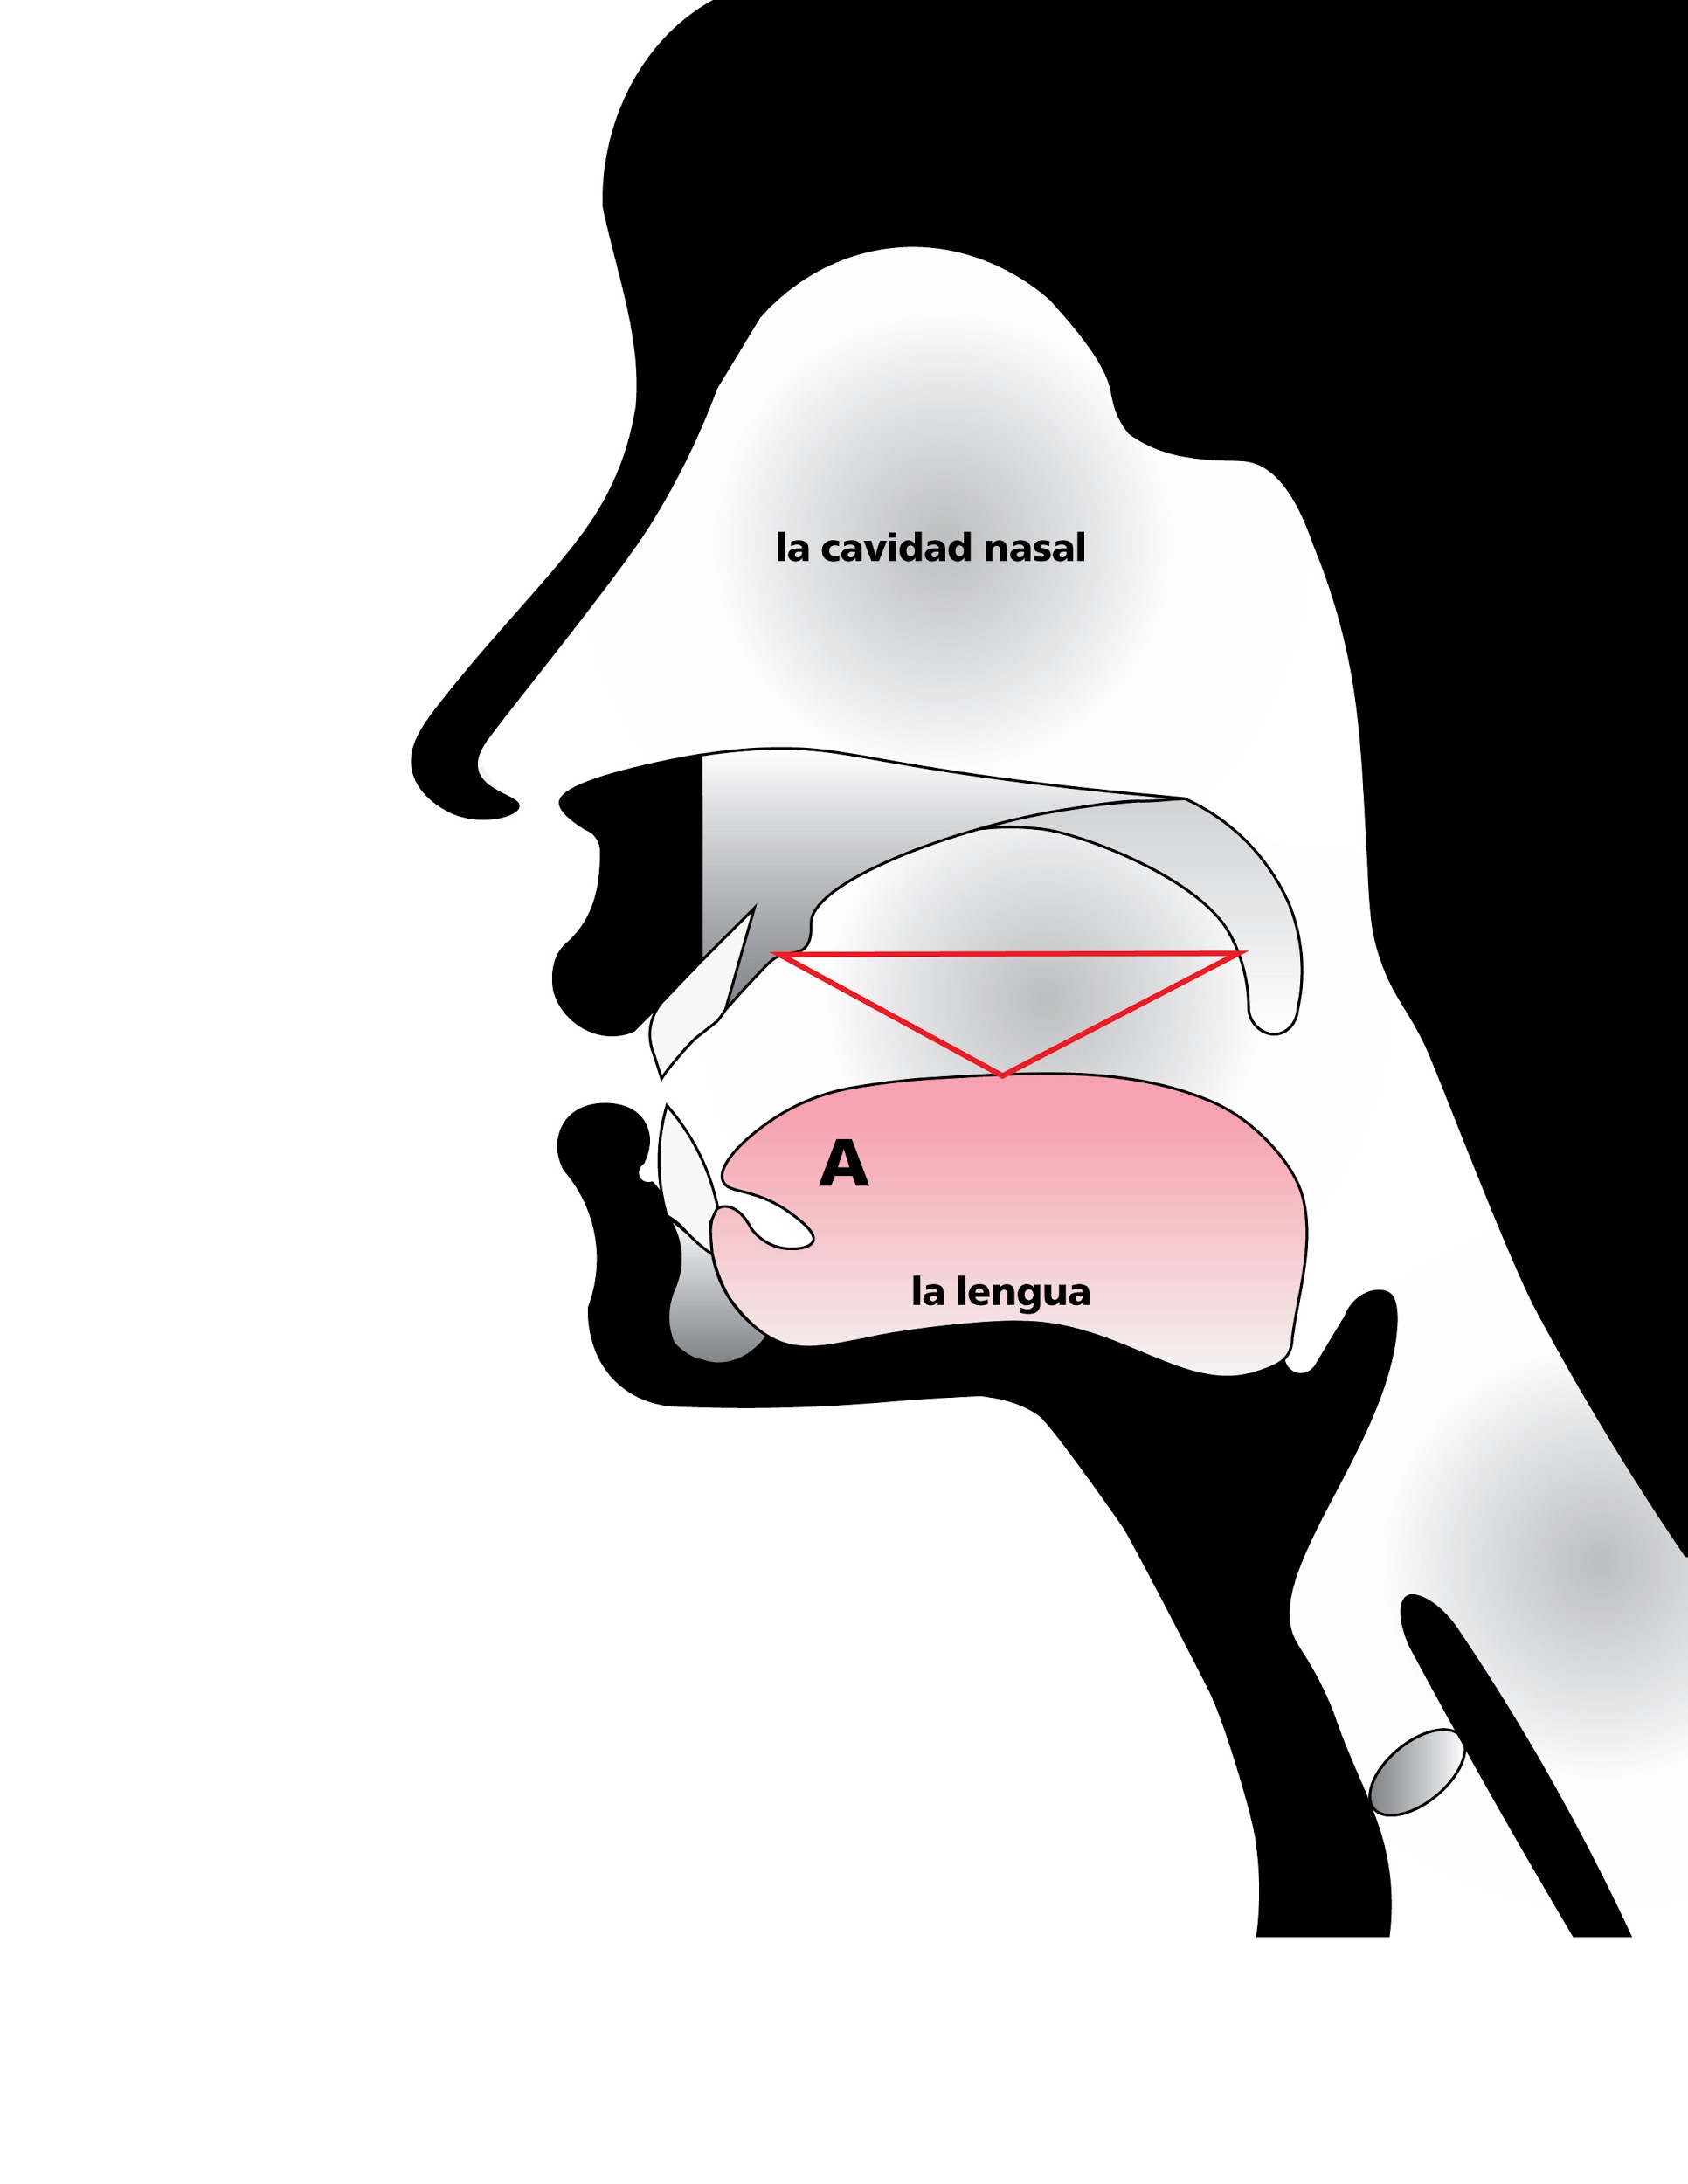 Anatomical sketch of nasal cavity emphasizing space in roof of mouth, in Spanish